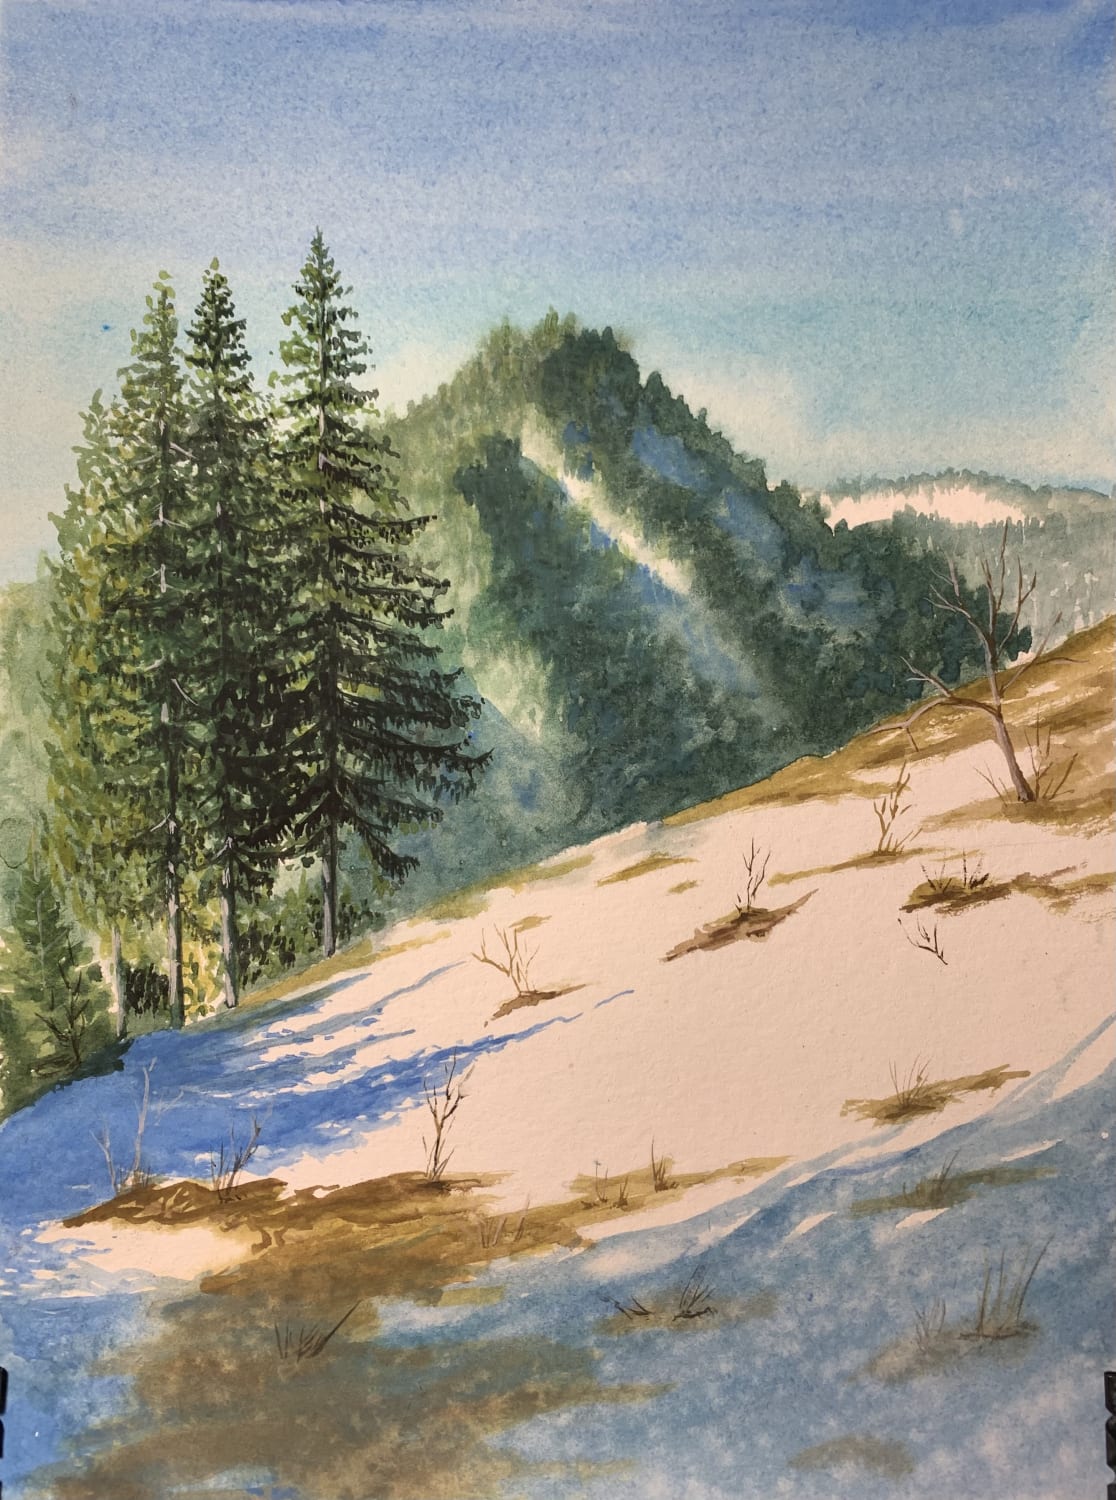 3 pines, watercolor en plein air. (Those pines are all that's left in 30 years from a lush forest above my house. I used to gather chanterelle mushrooms right at their feet, there was always a lot of them...)